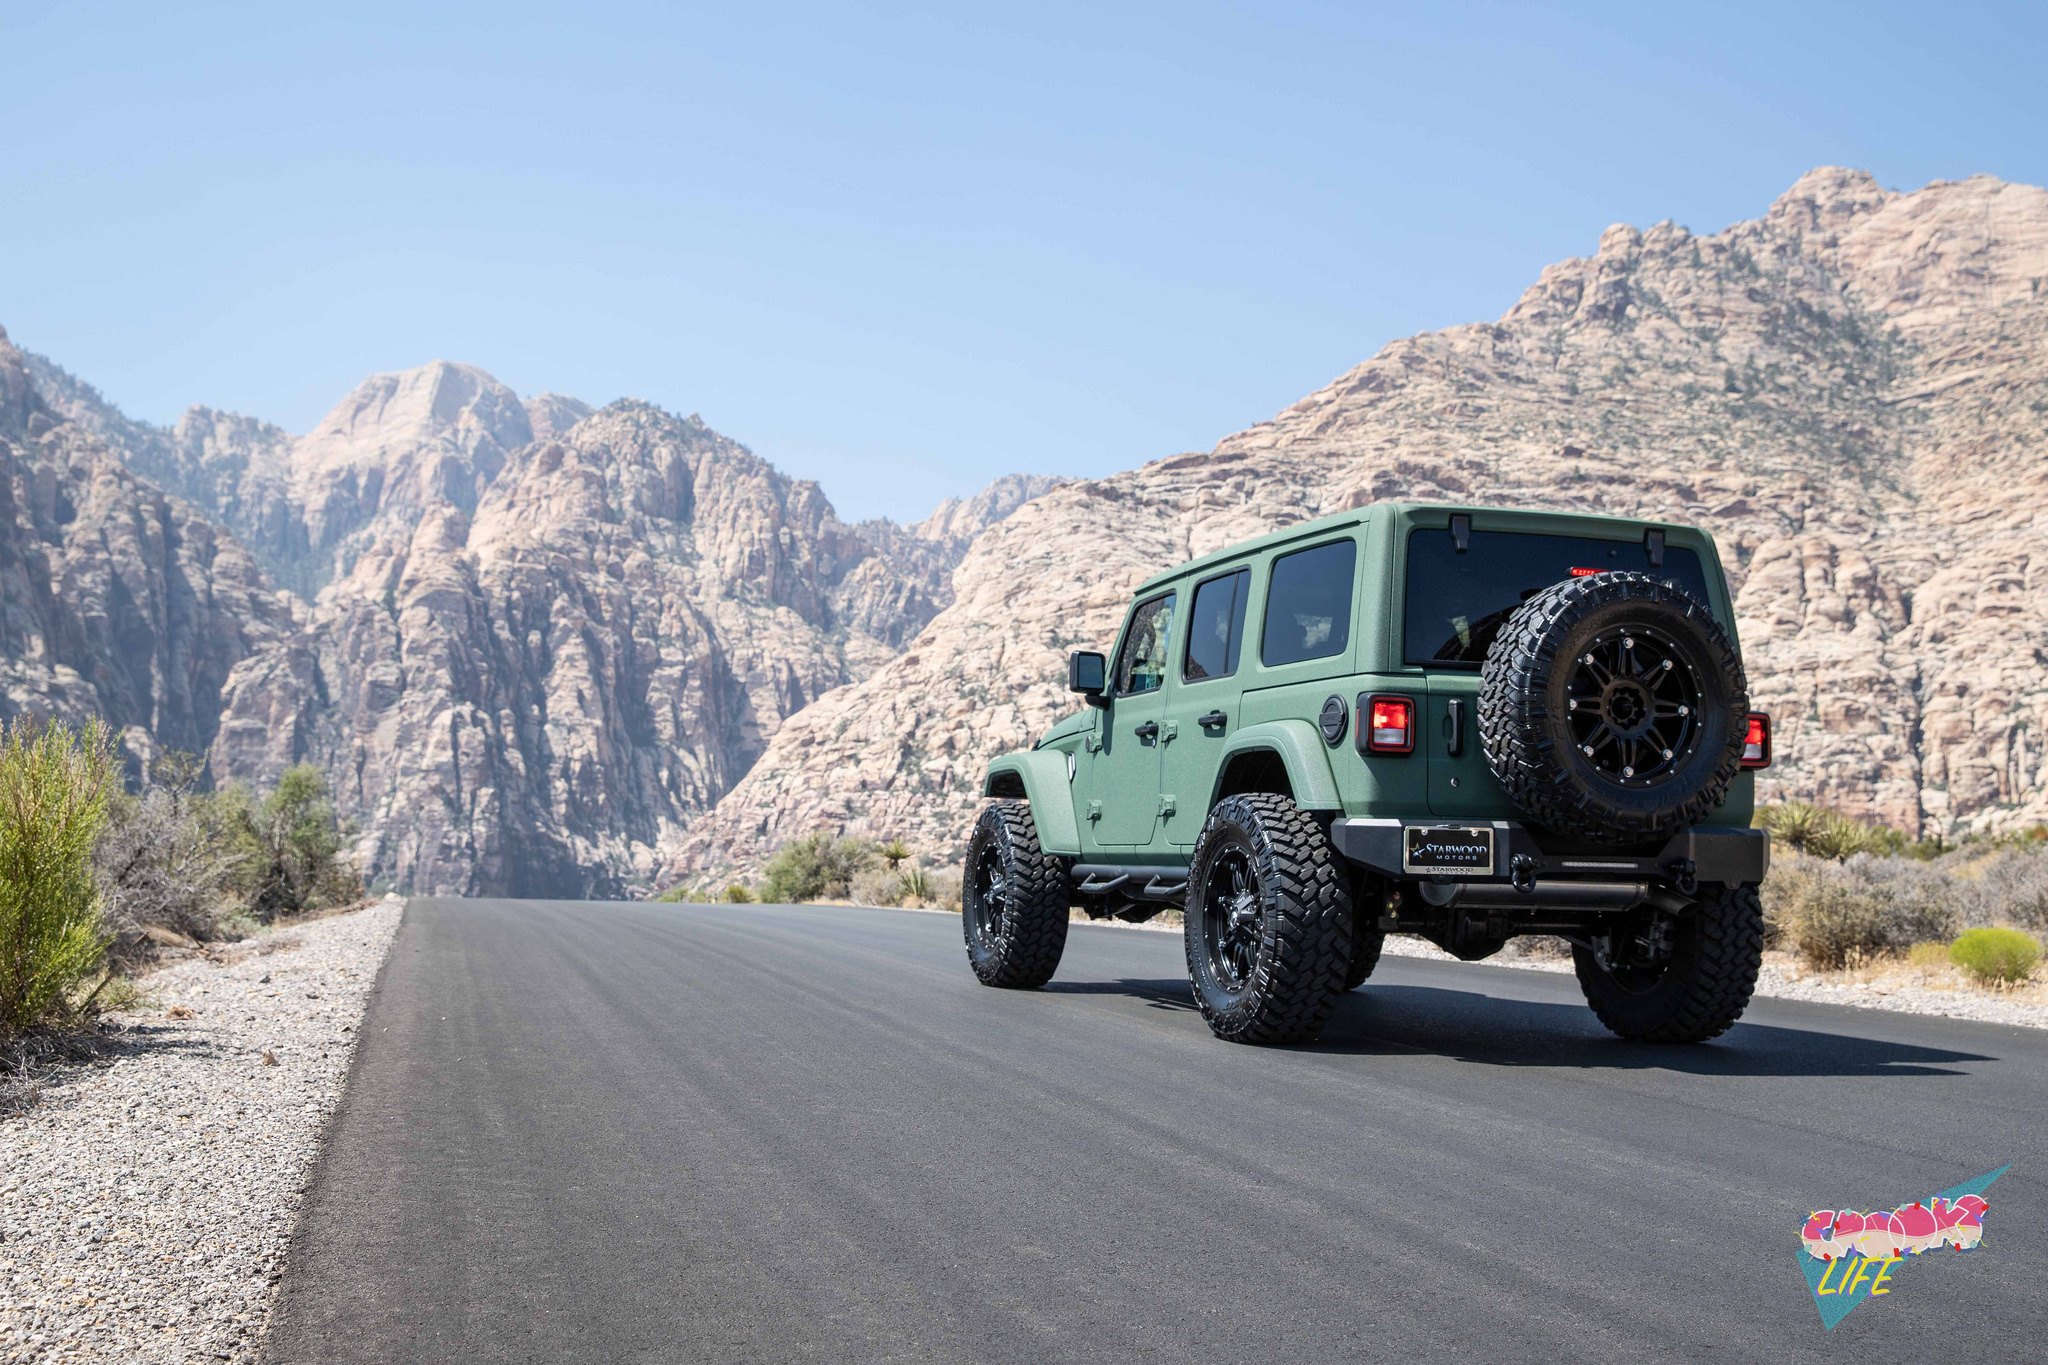 Off-Road Rear Bumper on Green Jeep Wrangler  - Photo by Jimmy Crook